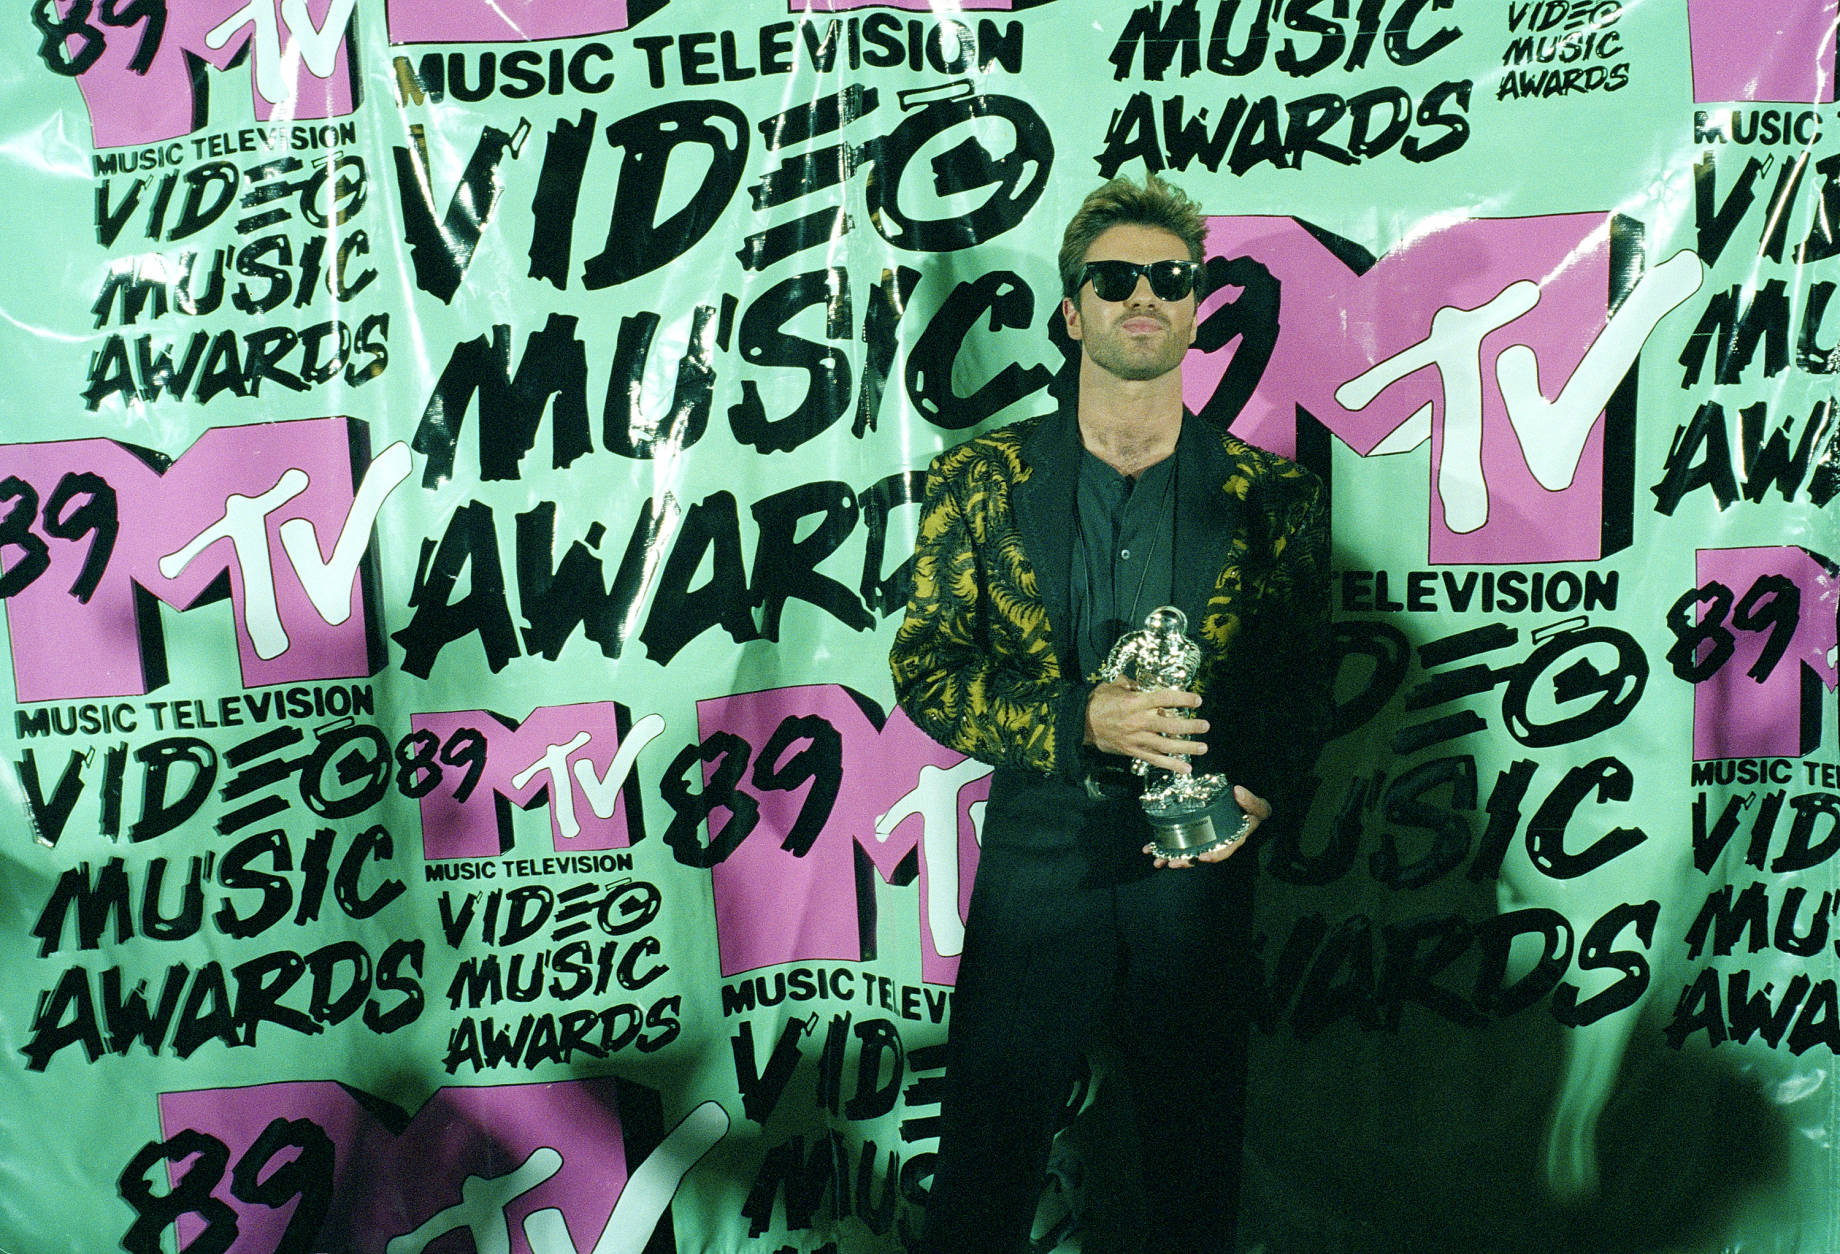 Pop singer George Michael displays his trophy after winning the 1989 Video "Vanguard Award" for his "Father Figure" video during the MTV Music Awards Wednesday, Sept. 6, 1989 at the Universal Amitheatre in Universal City, Calf. (AP Photo/Alan Greth)